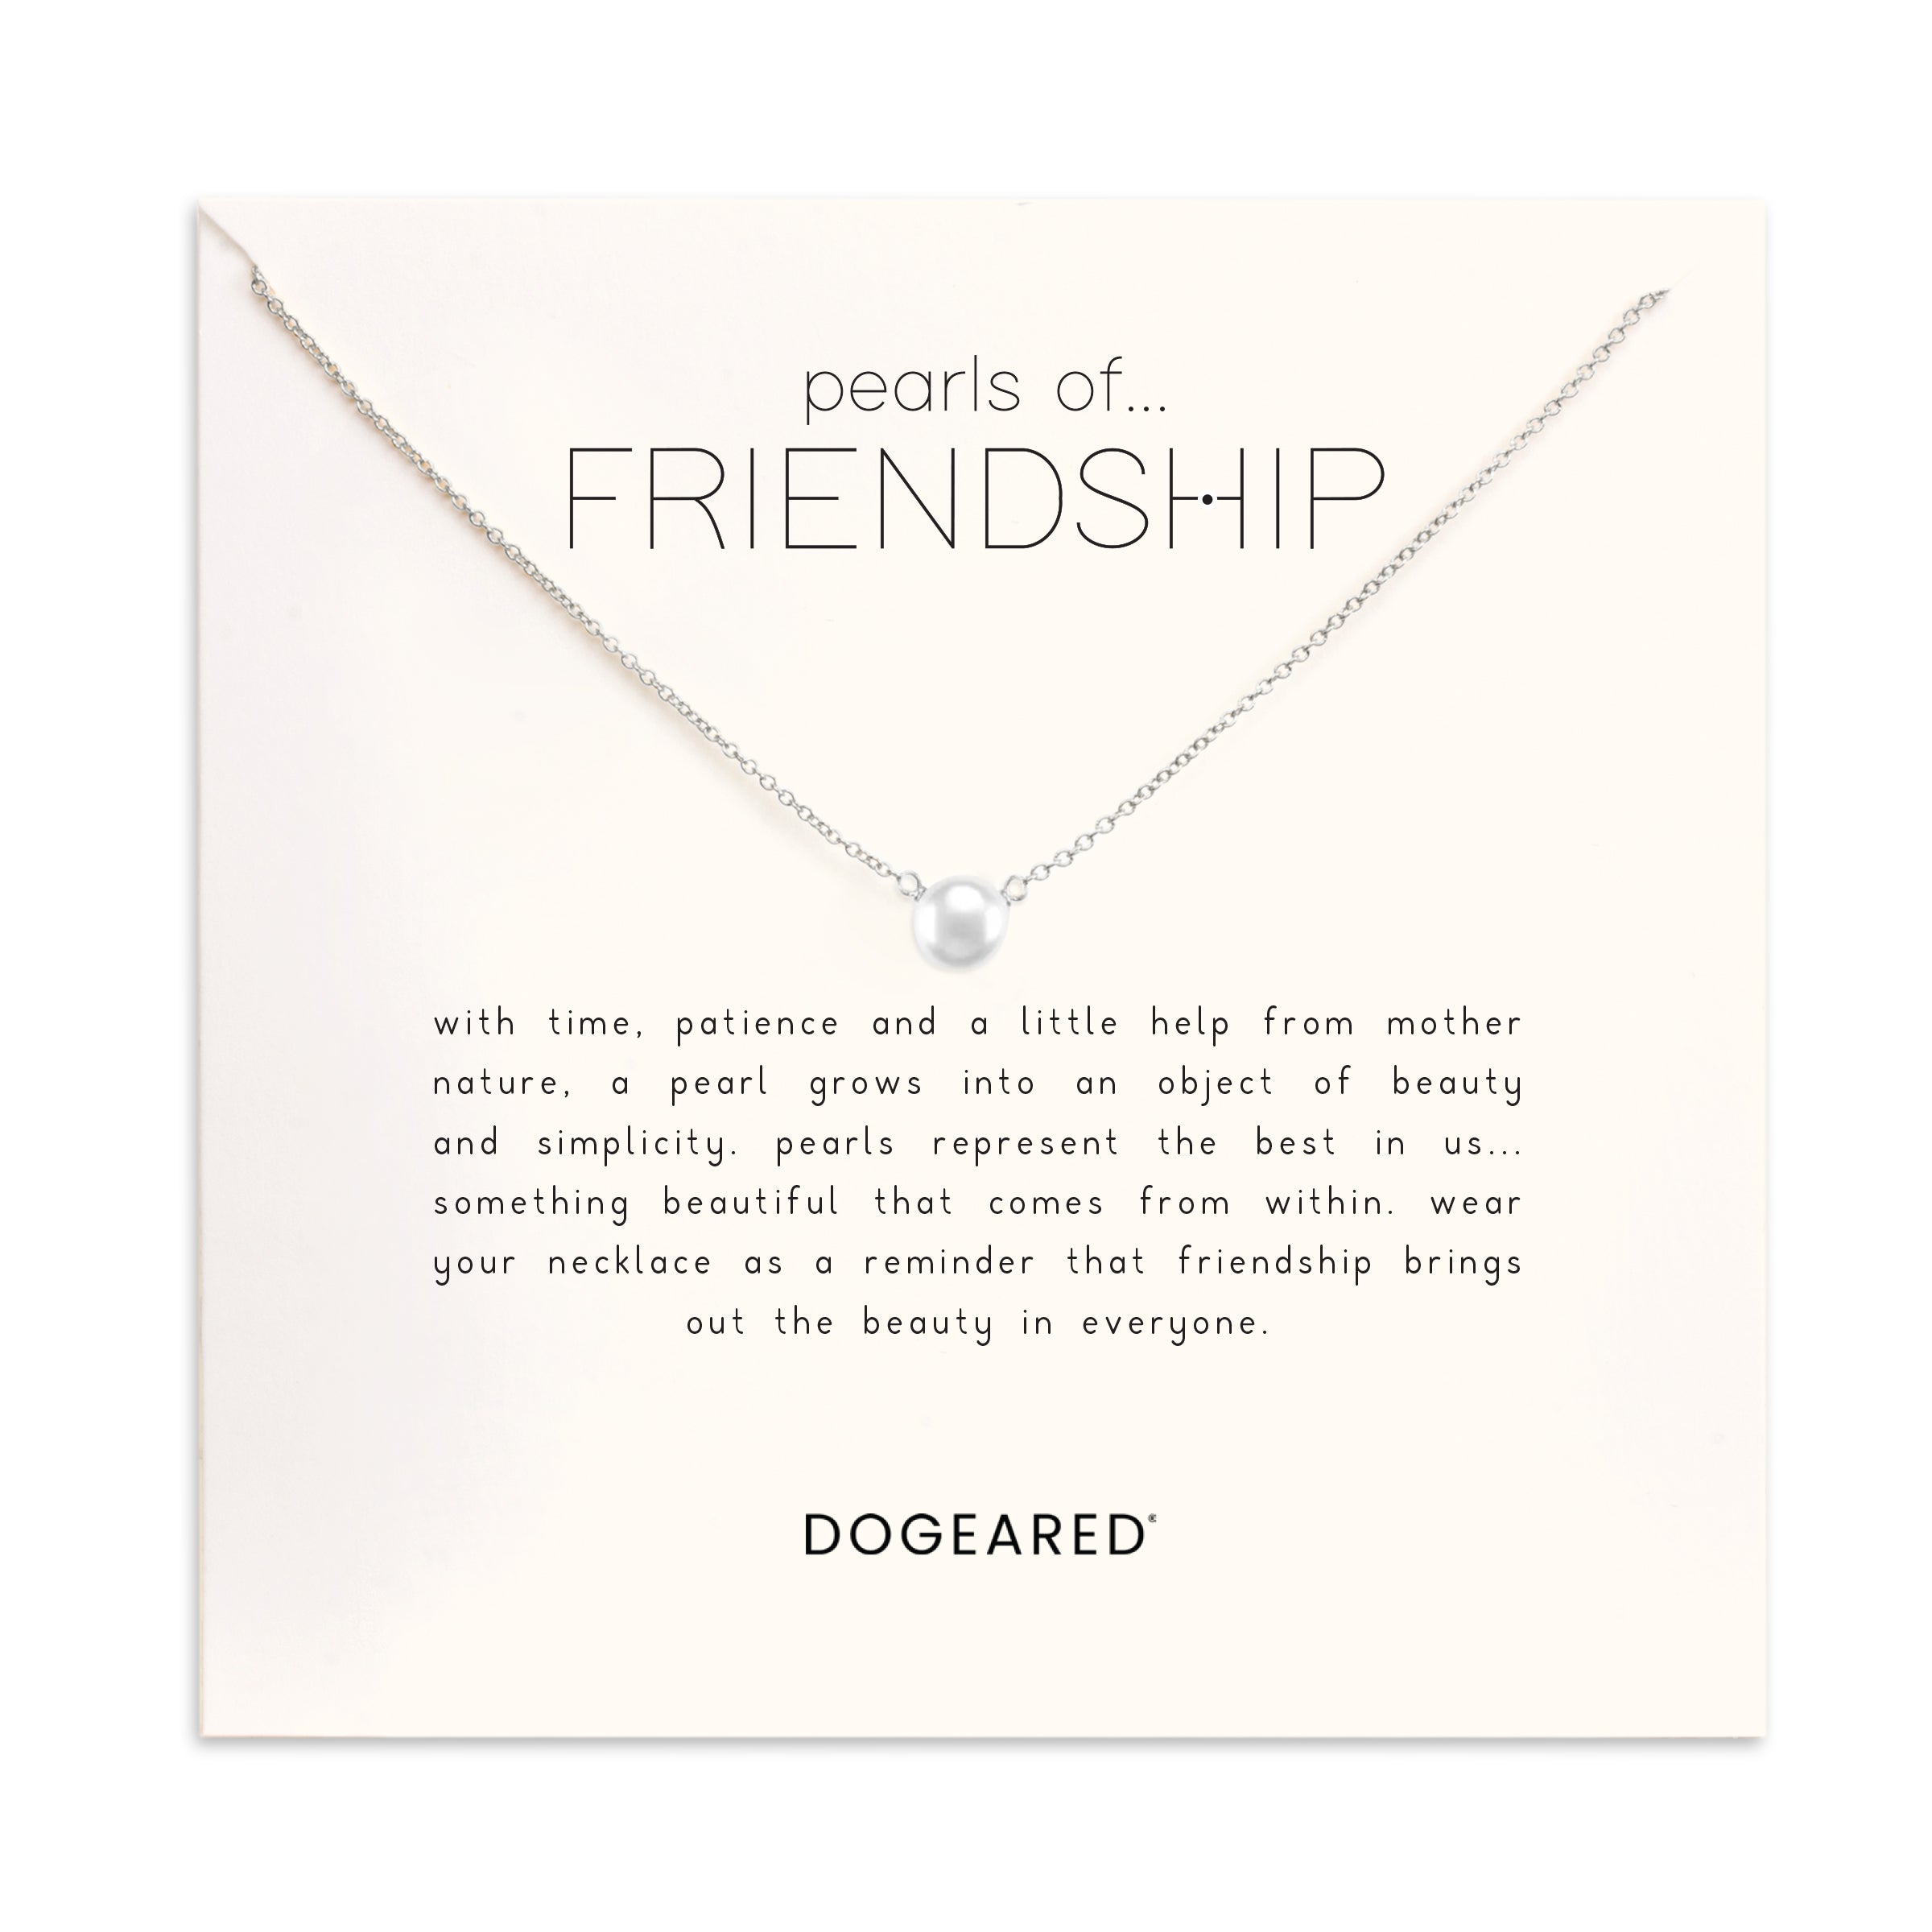 Pearls of friendship small white pearl necklace